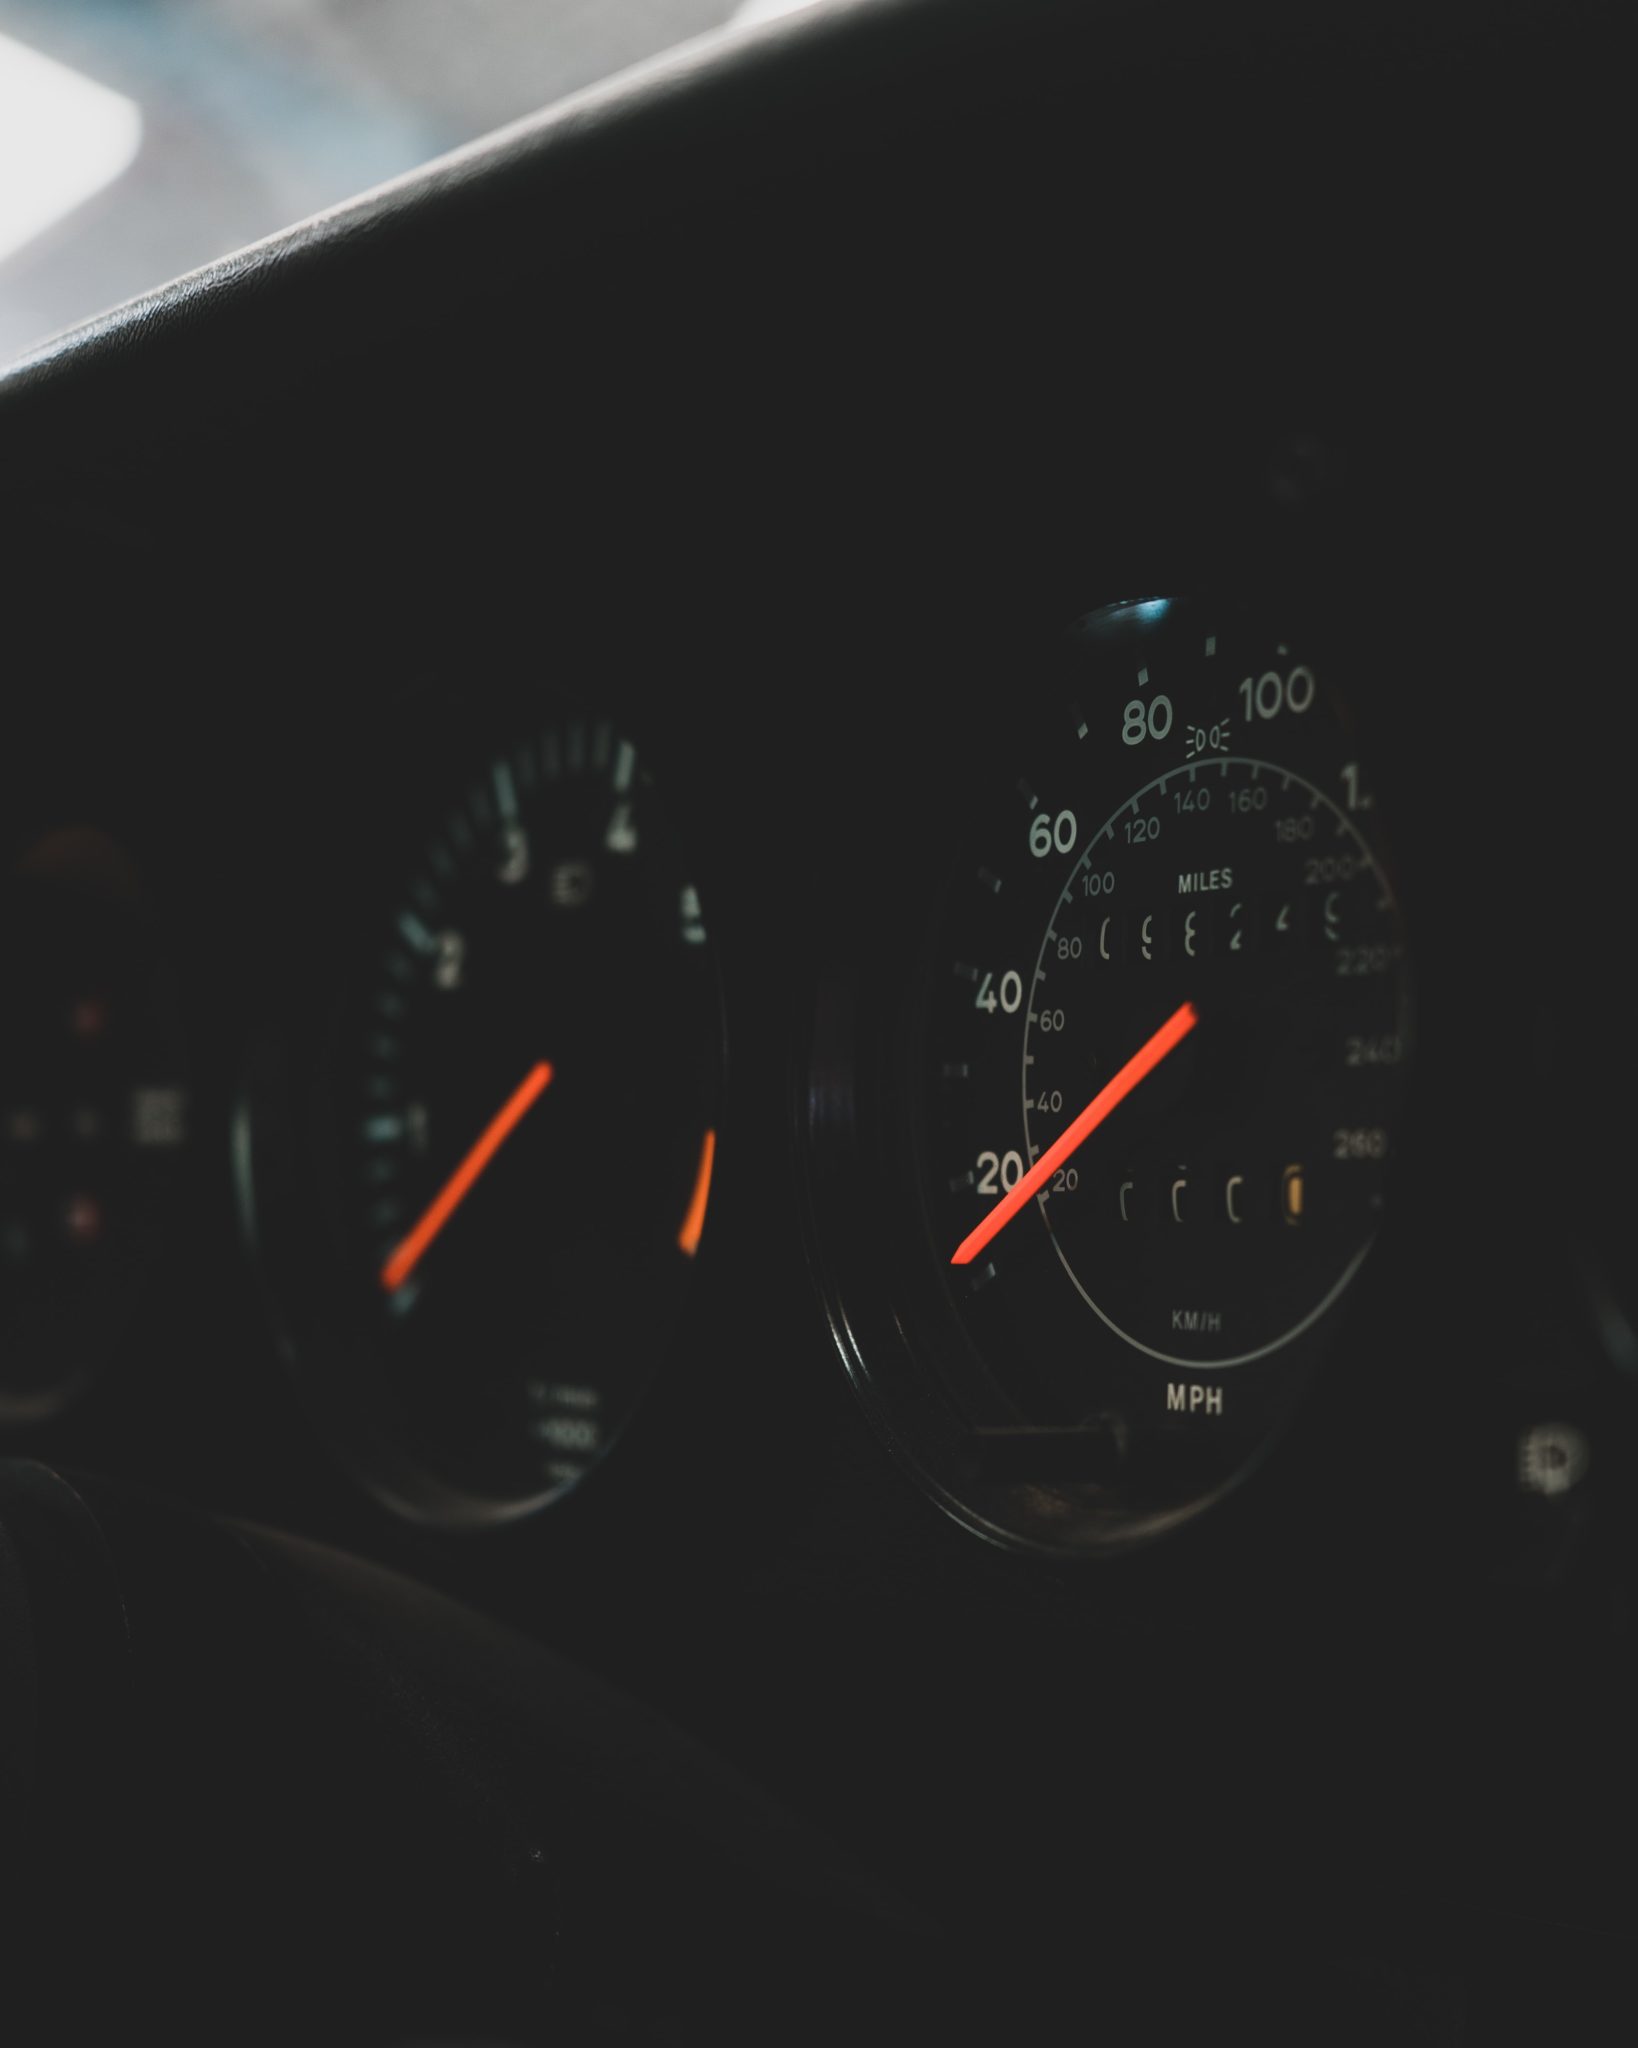 A close up of a speedometer